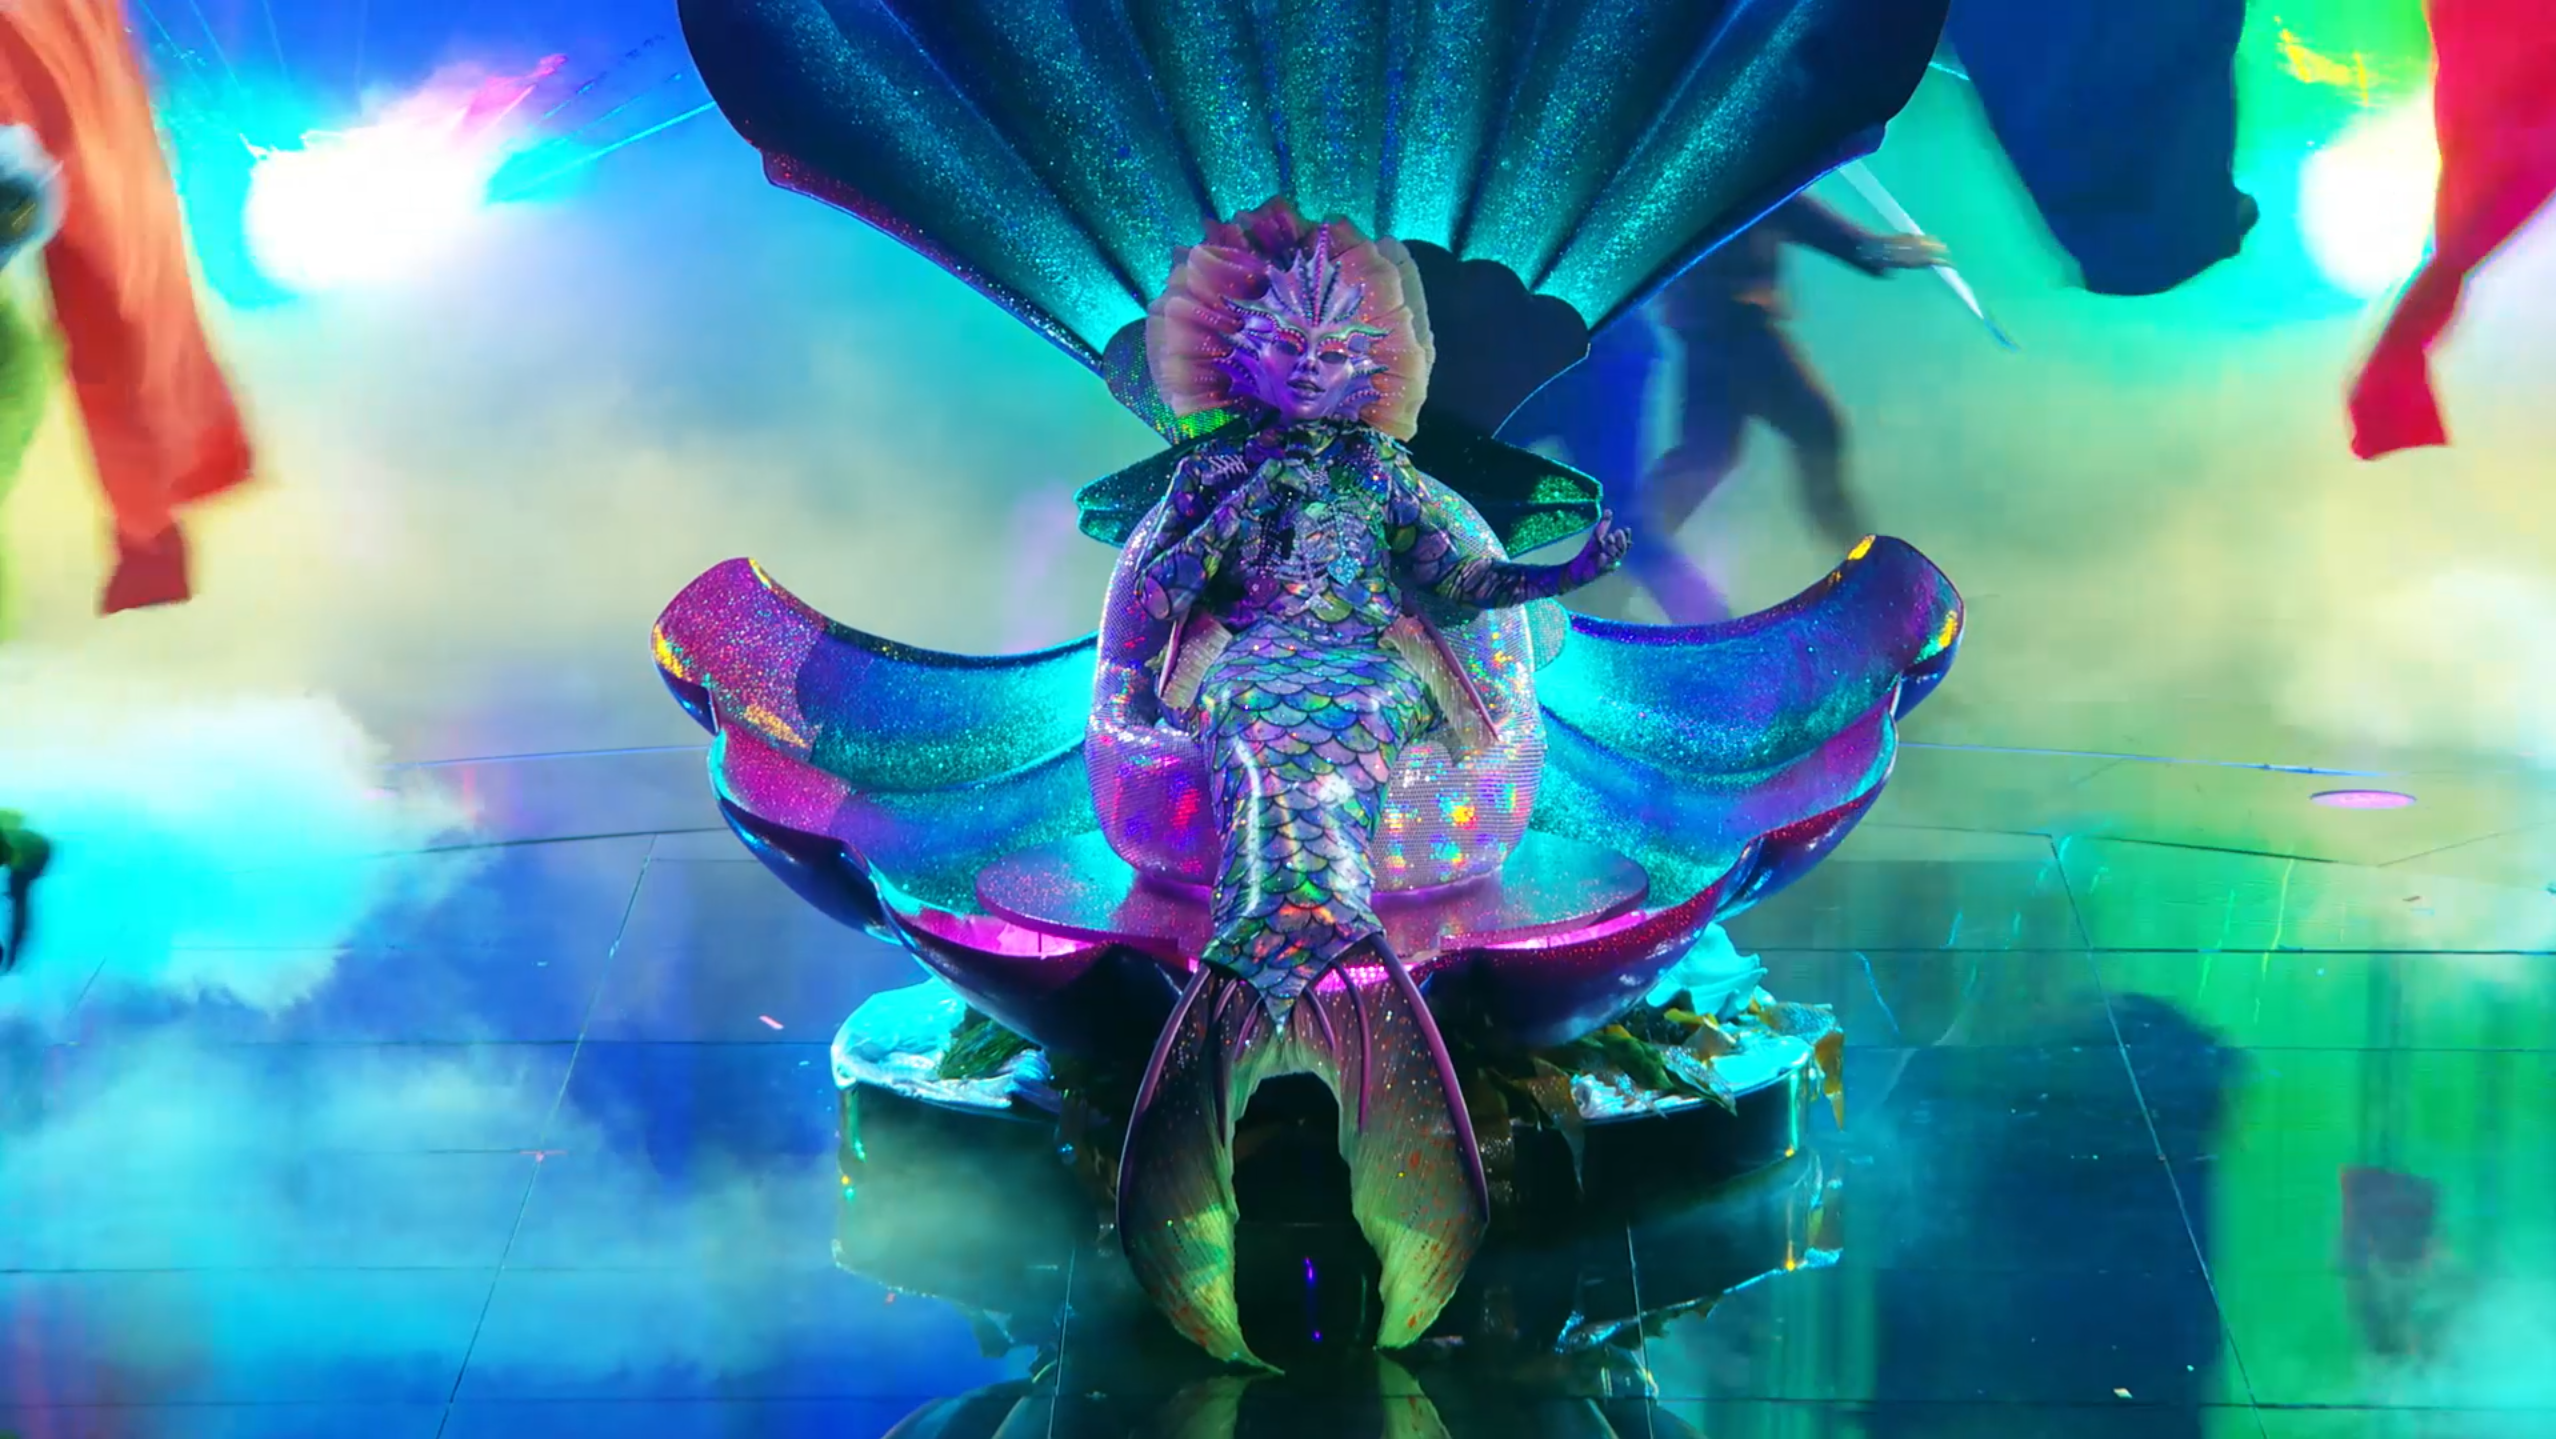 The Masked Singer S8 Mermaid Performs "Any Dream Will Do" 2022-10-12